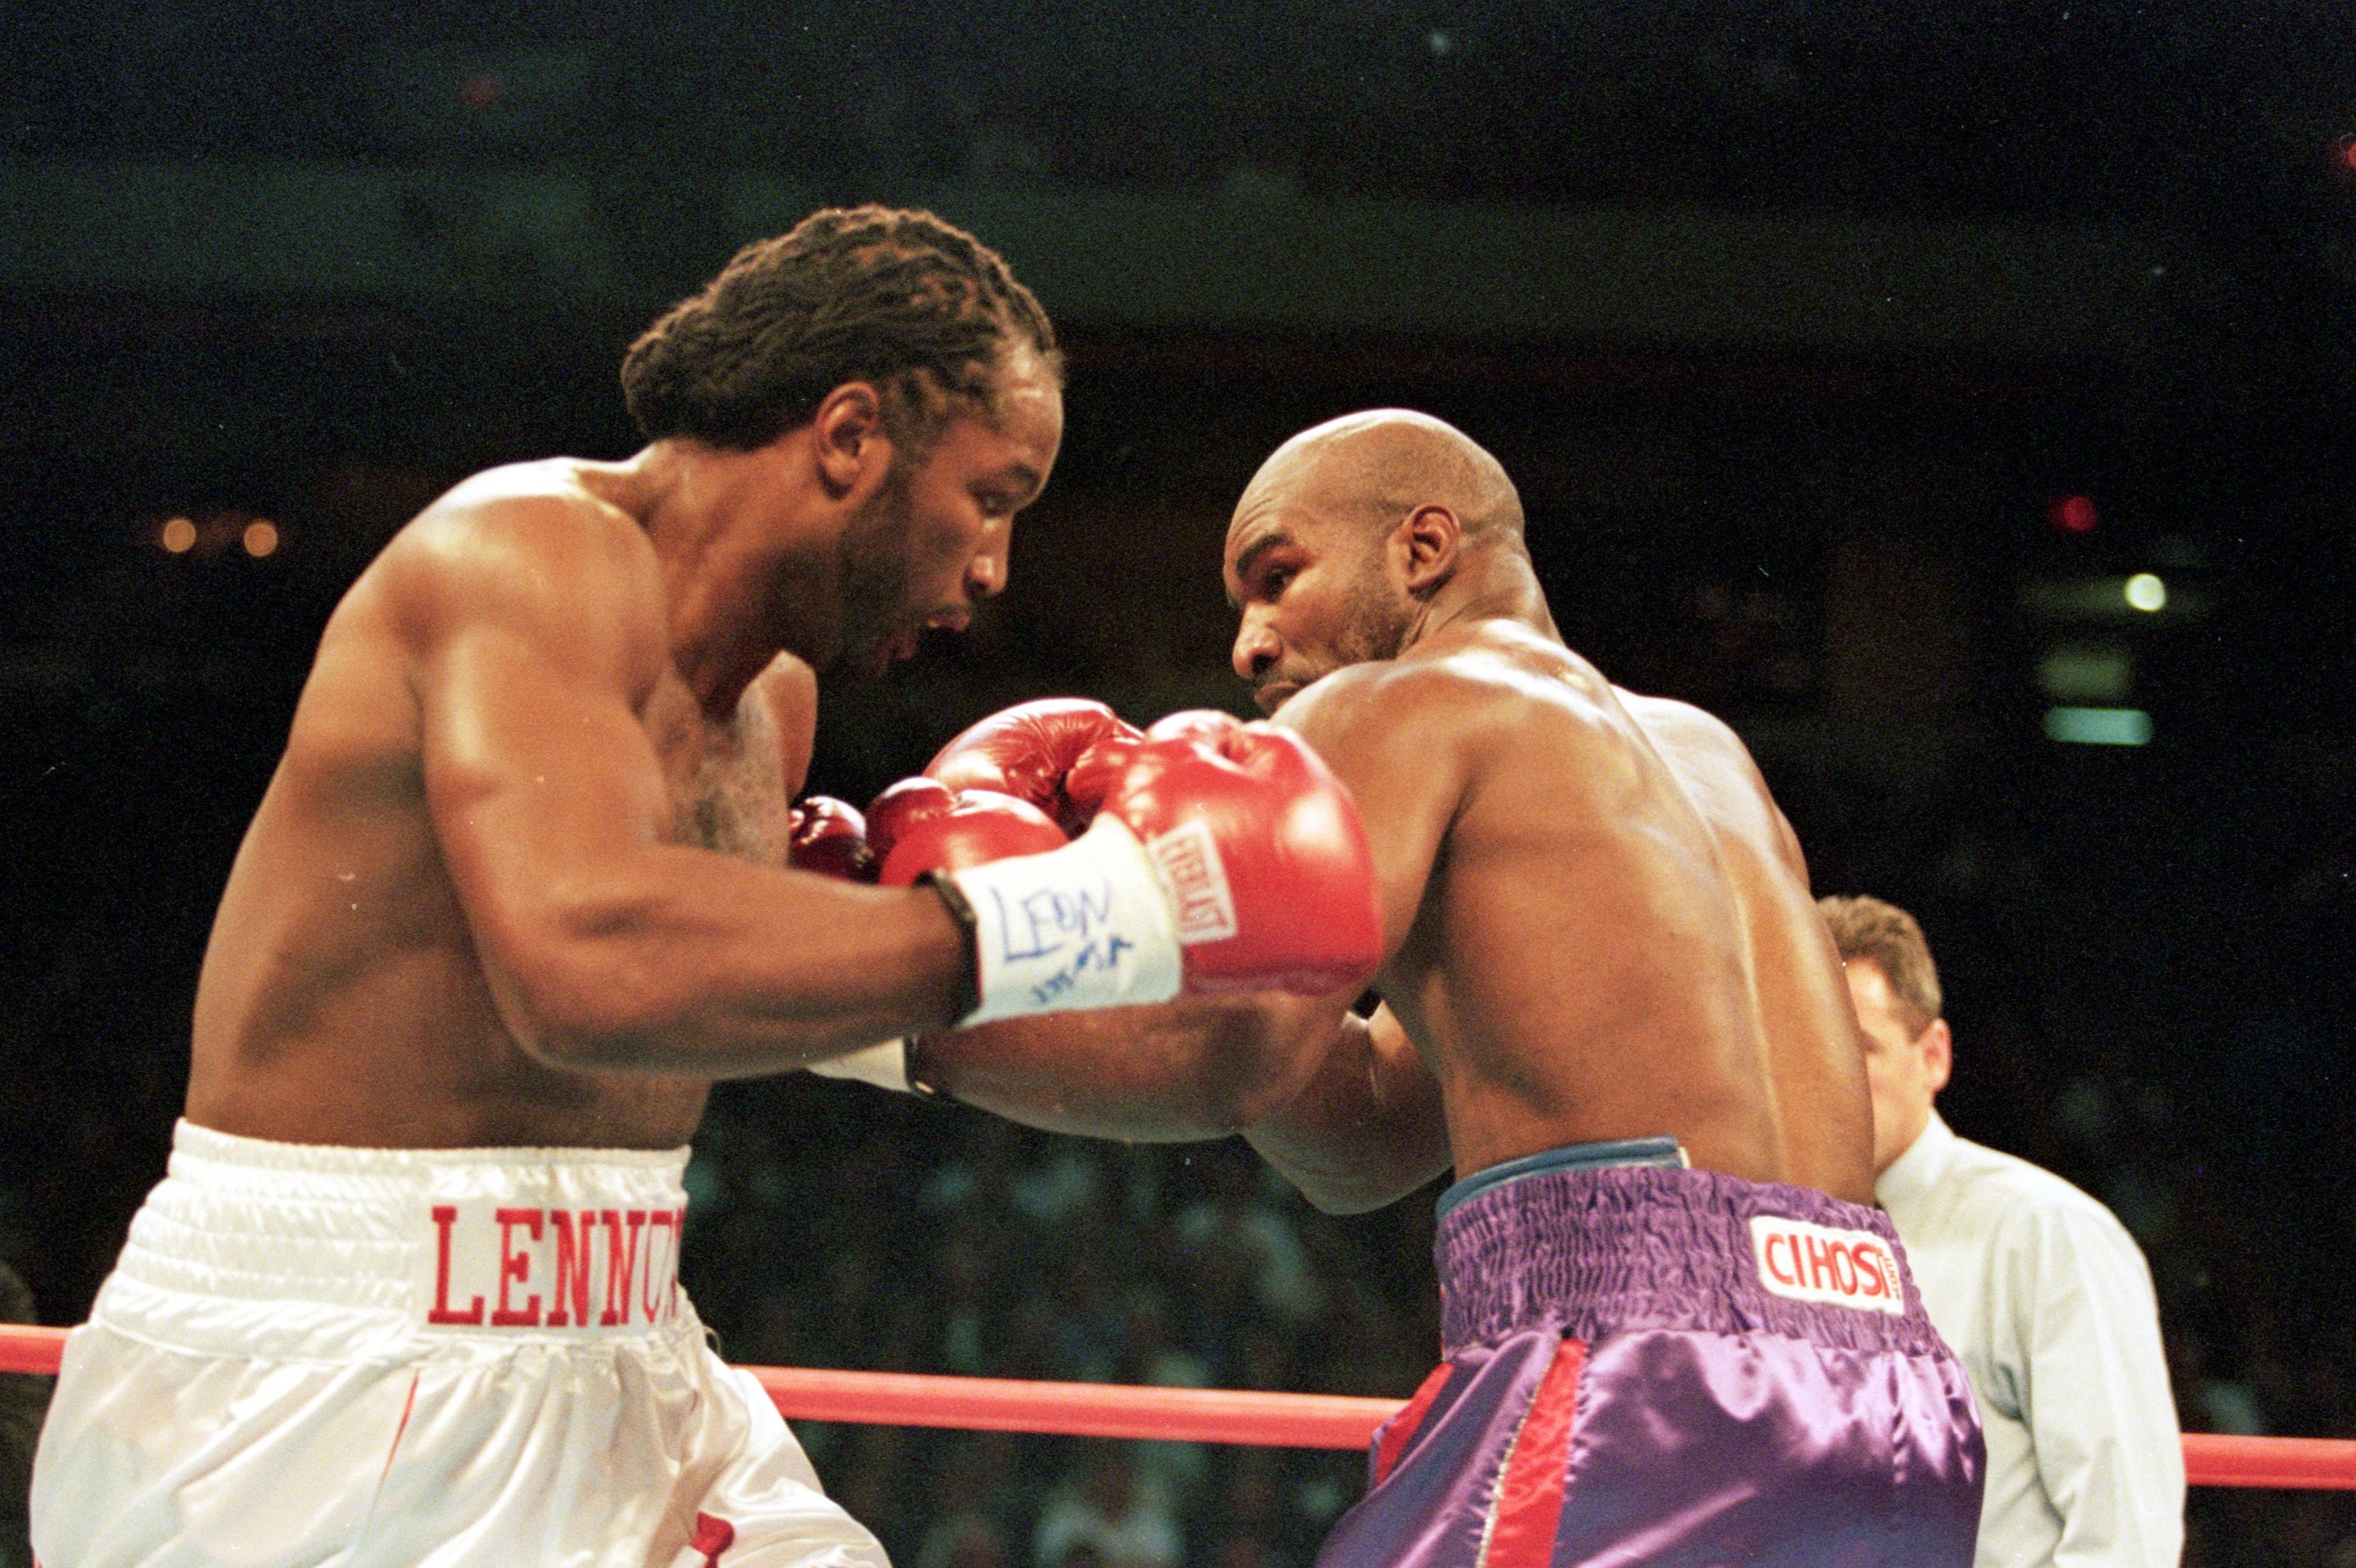 Lennox Lewis (left) beat Evander Holyfield in 1999 to become undisputed heavyweight champion